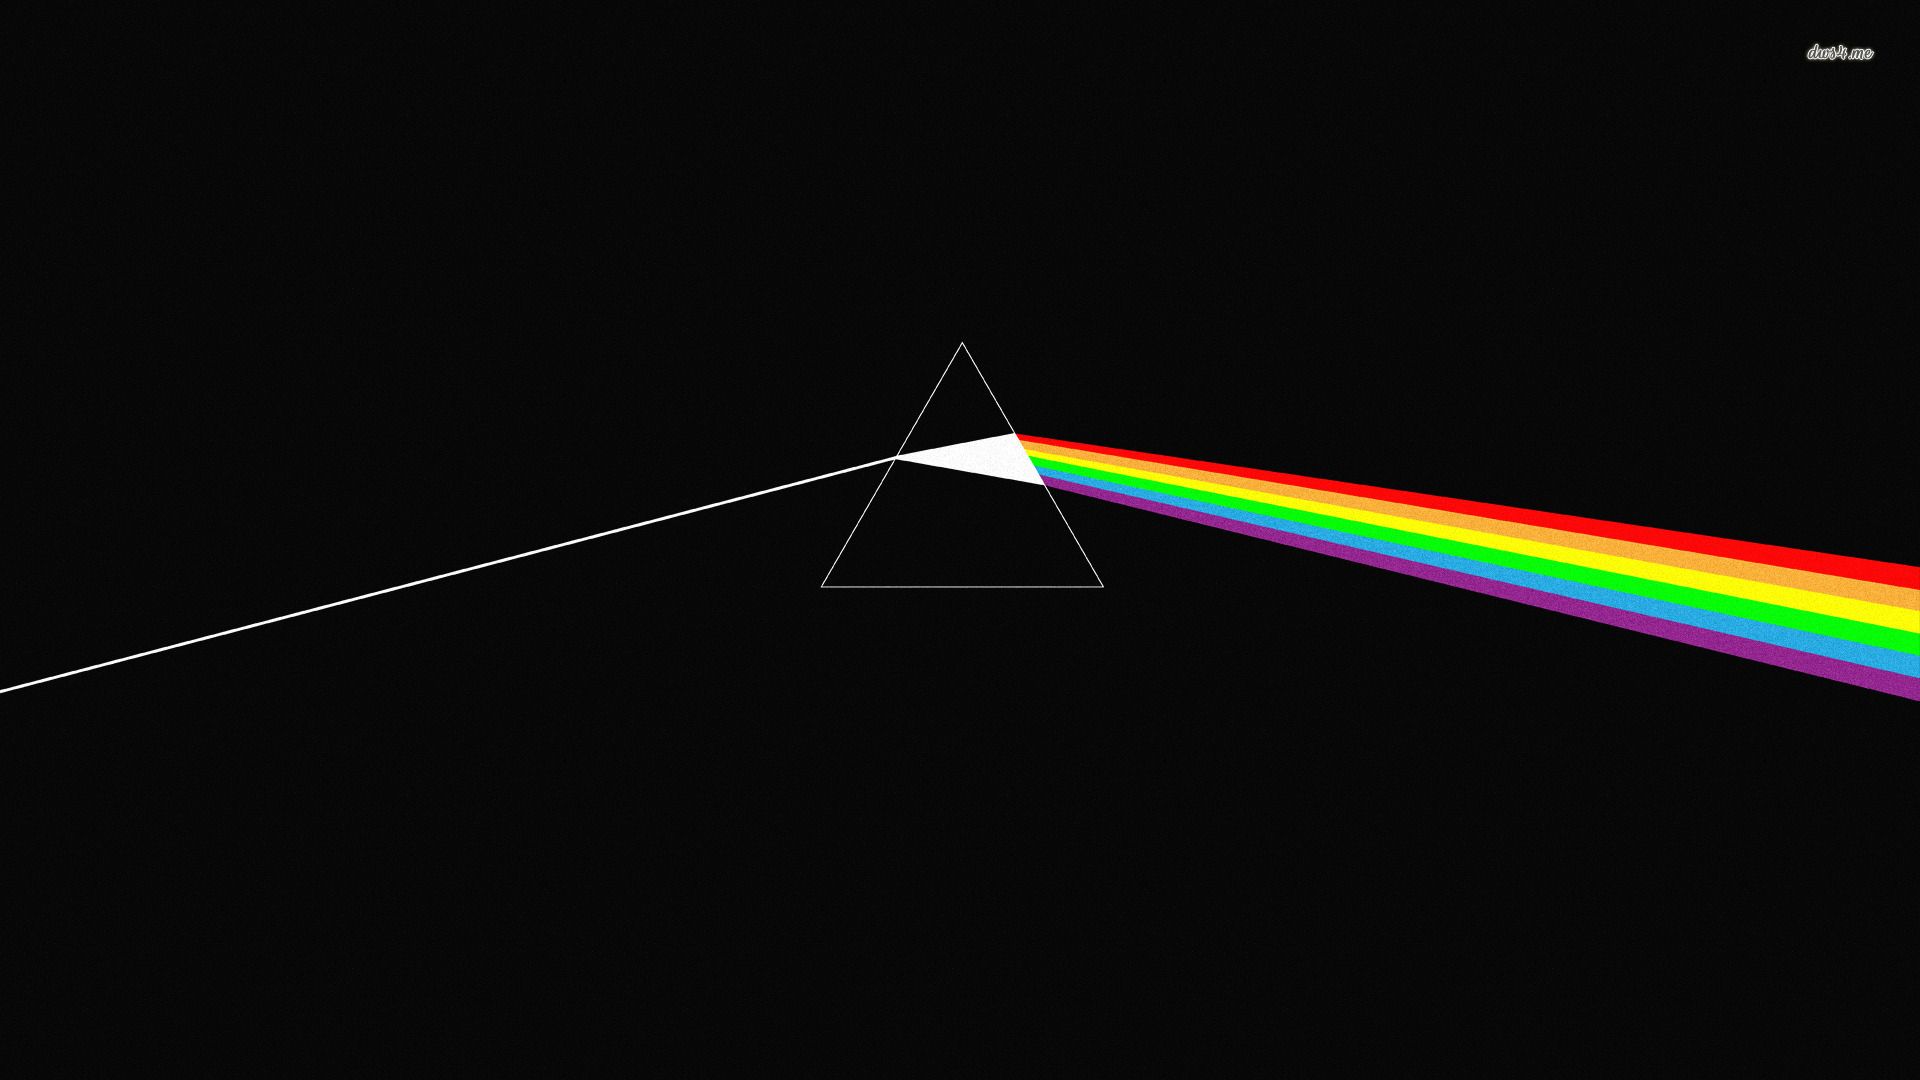 Dark Side of the Moon Wallpaper Free Dark Side of the Moon Background